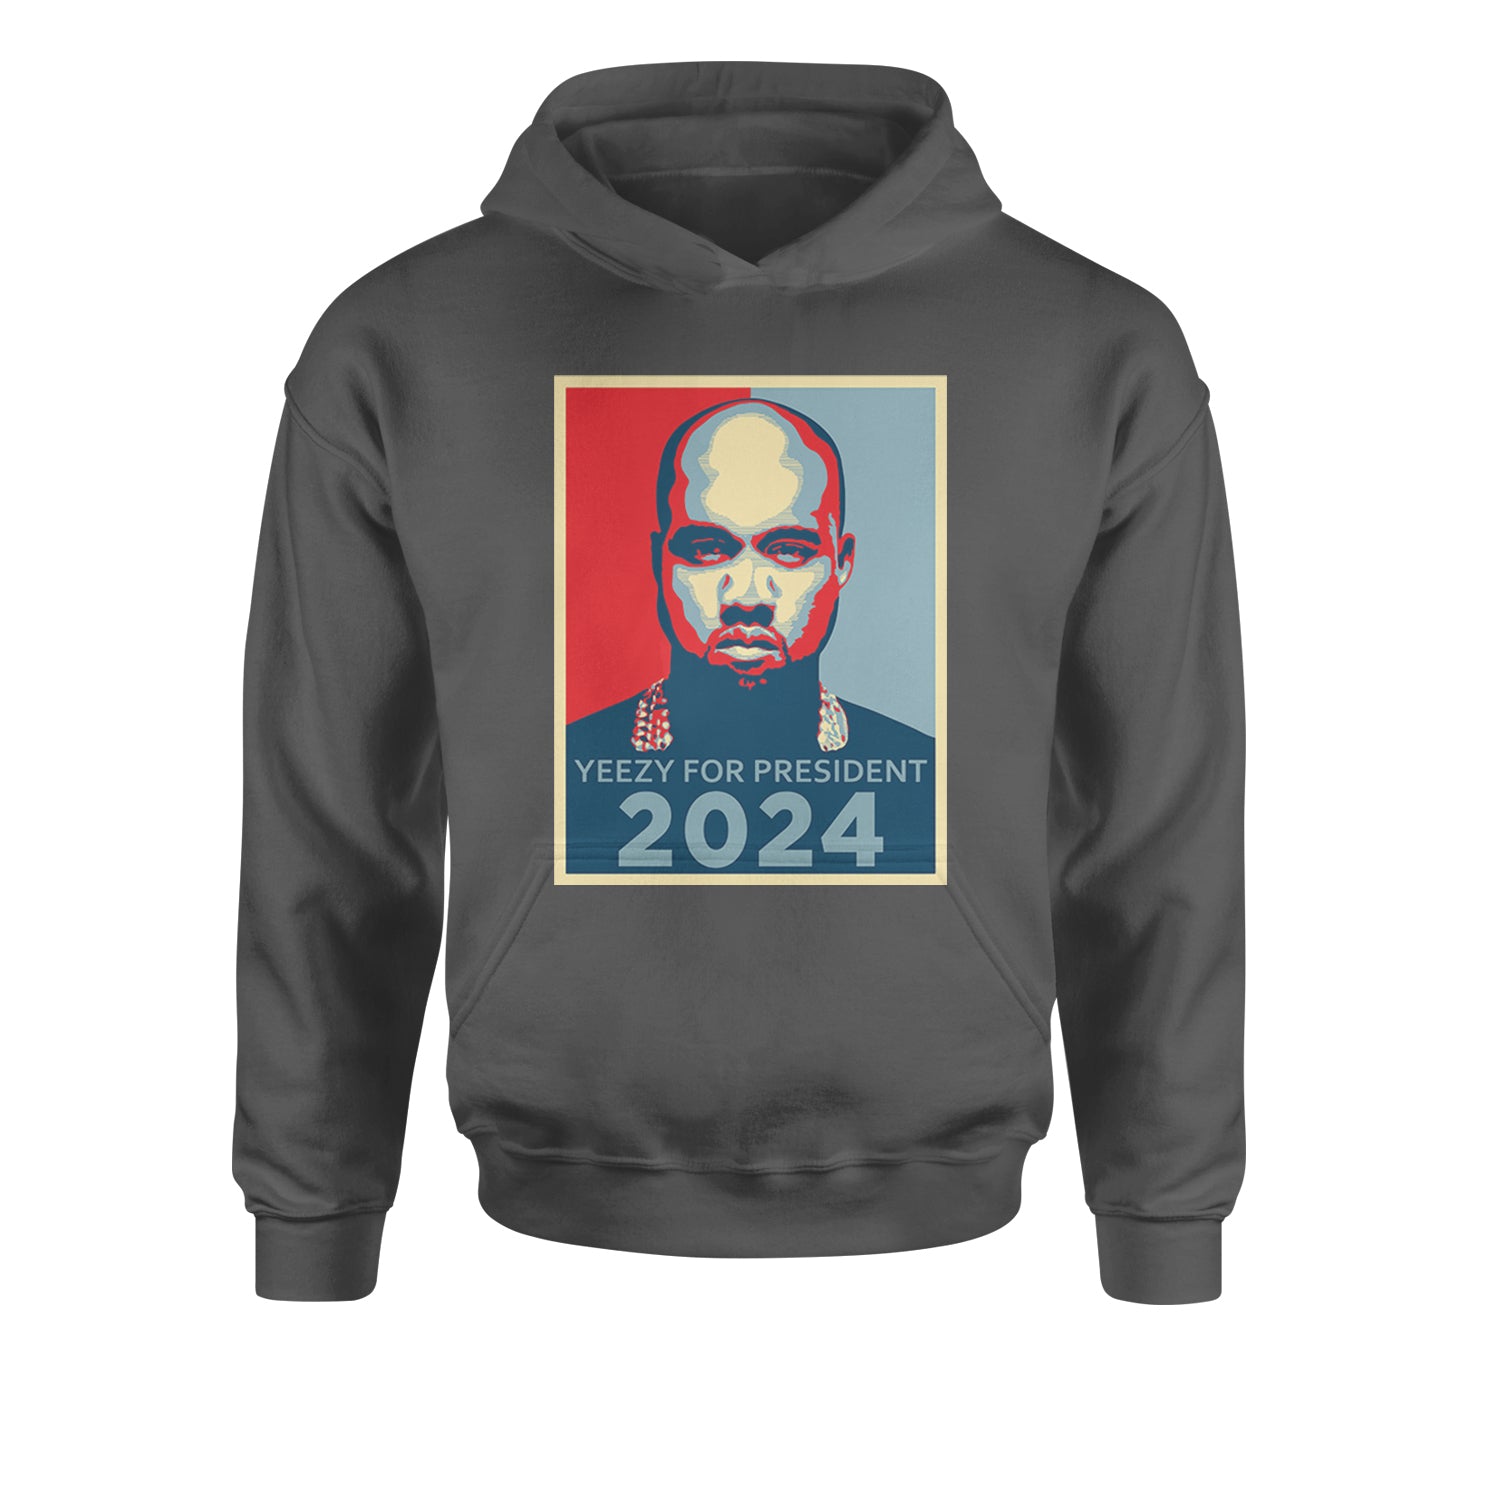 Yeezus For President Vote for Ye Youth-Sized Hoodie Black